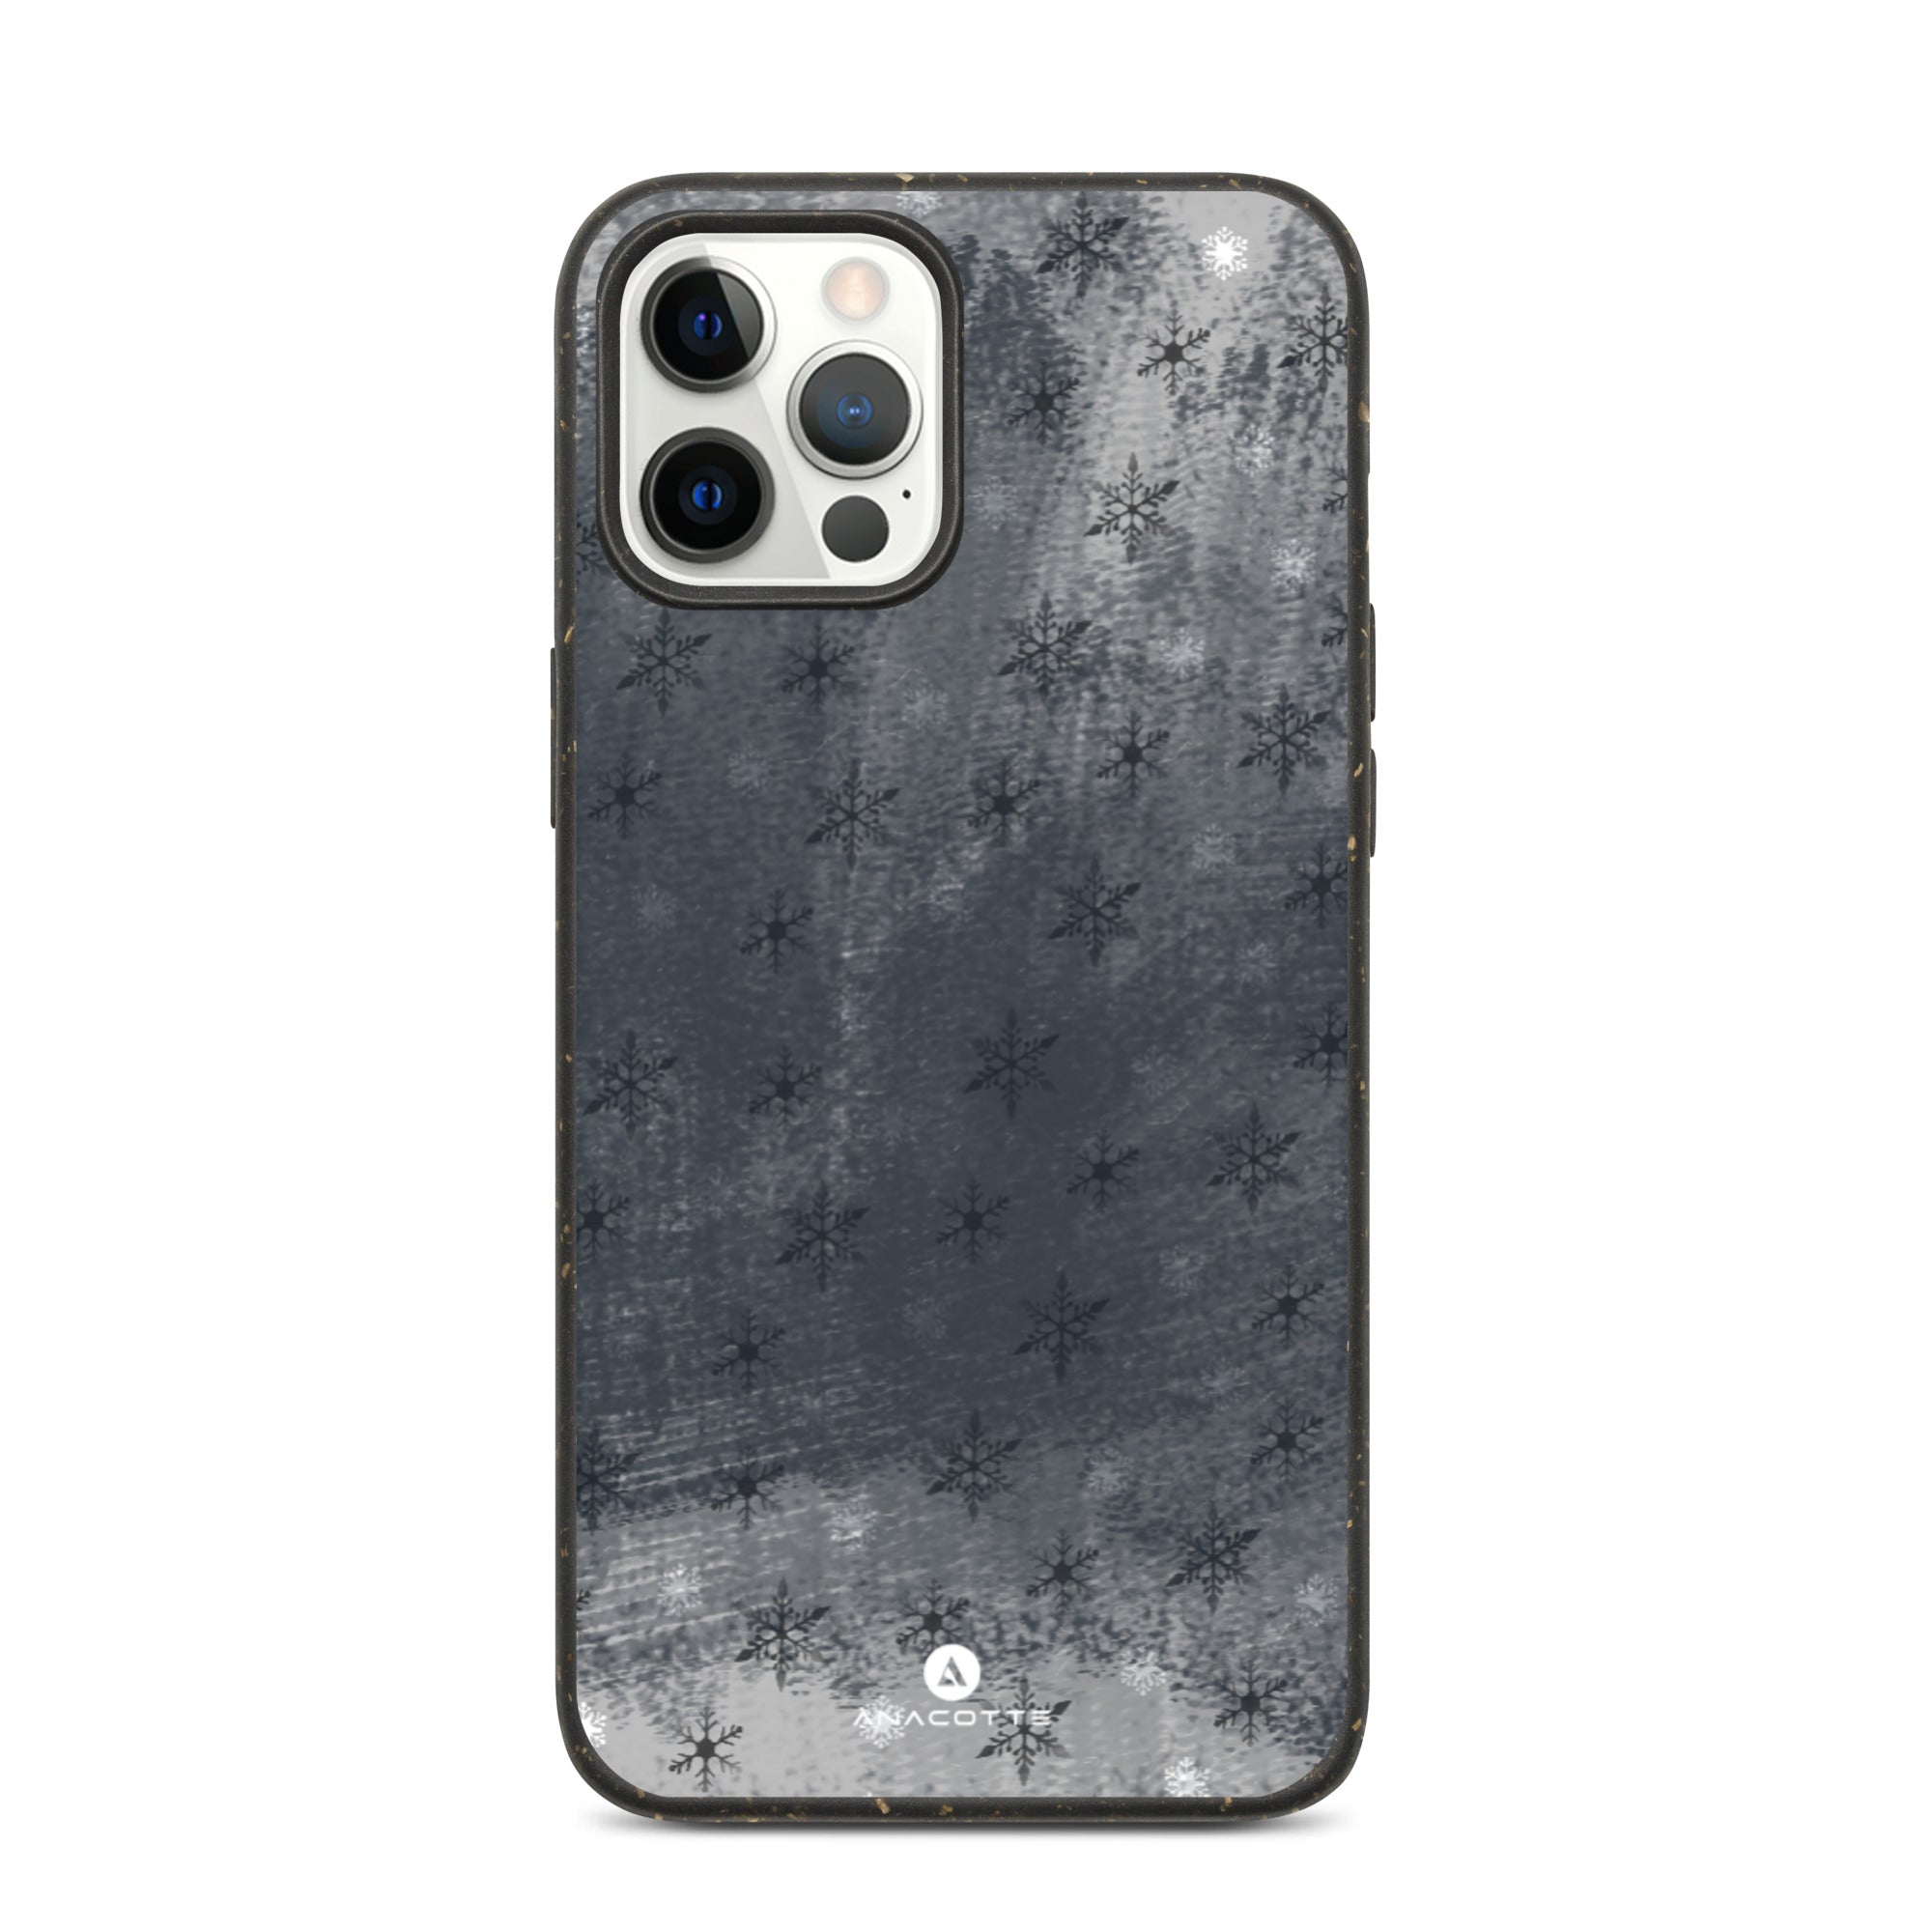 Christmas Edition Eco-Friendly Sustainable iPhone case